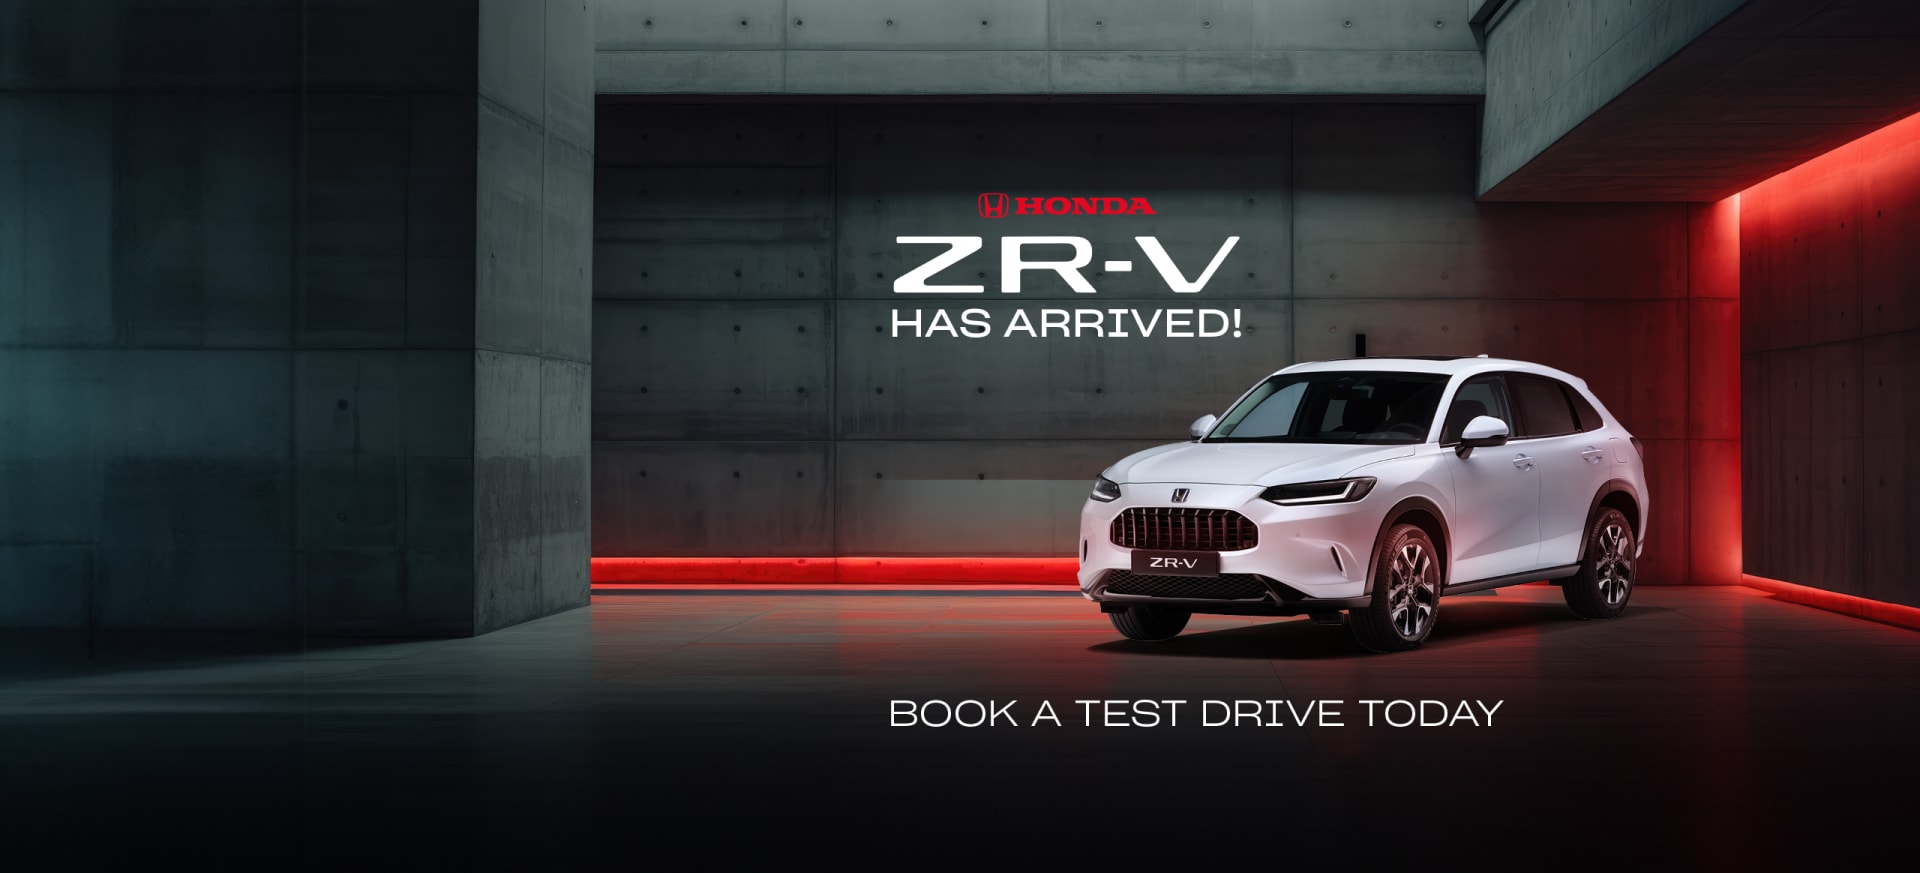 The ZR-V Has Arrived!